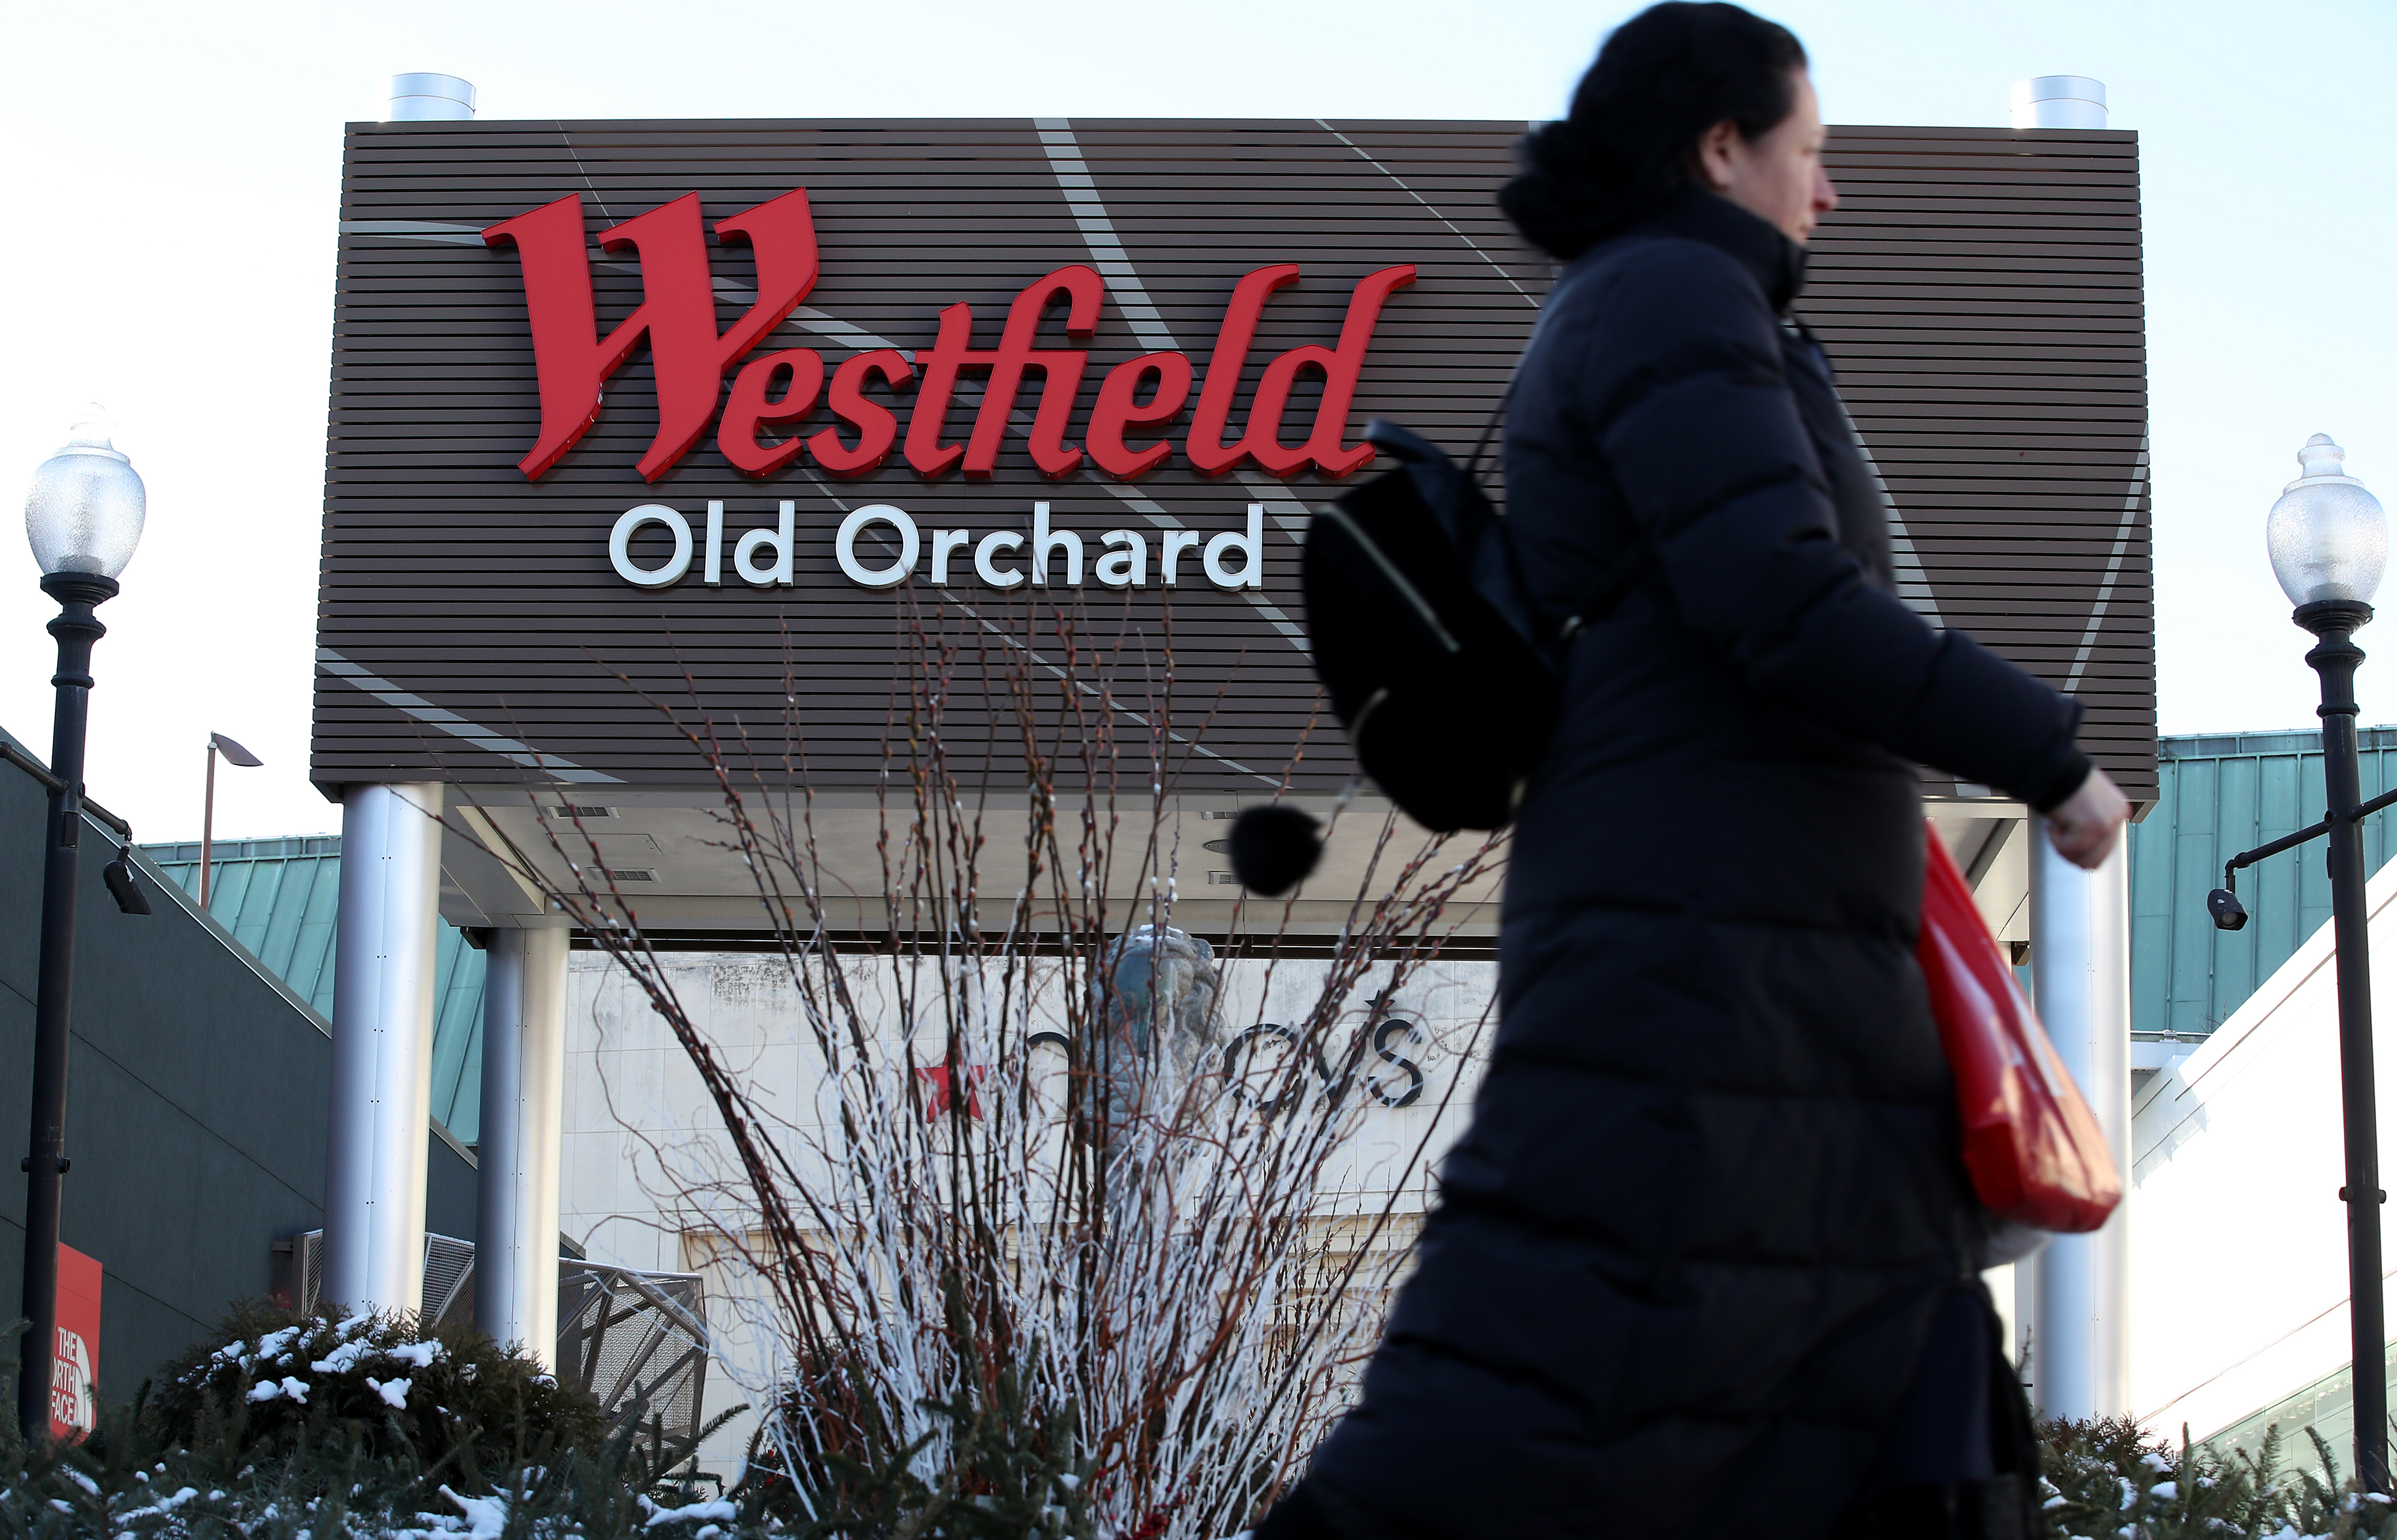 Urban Outfitters, Vuori, böhme and more to open at Westfield Old